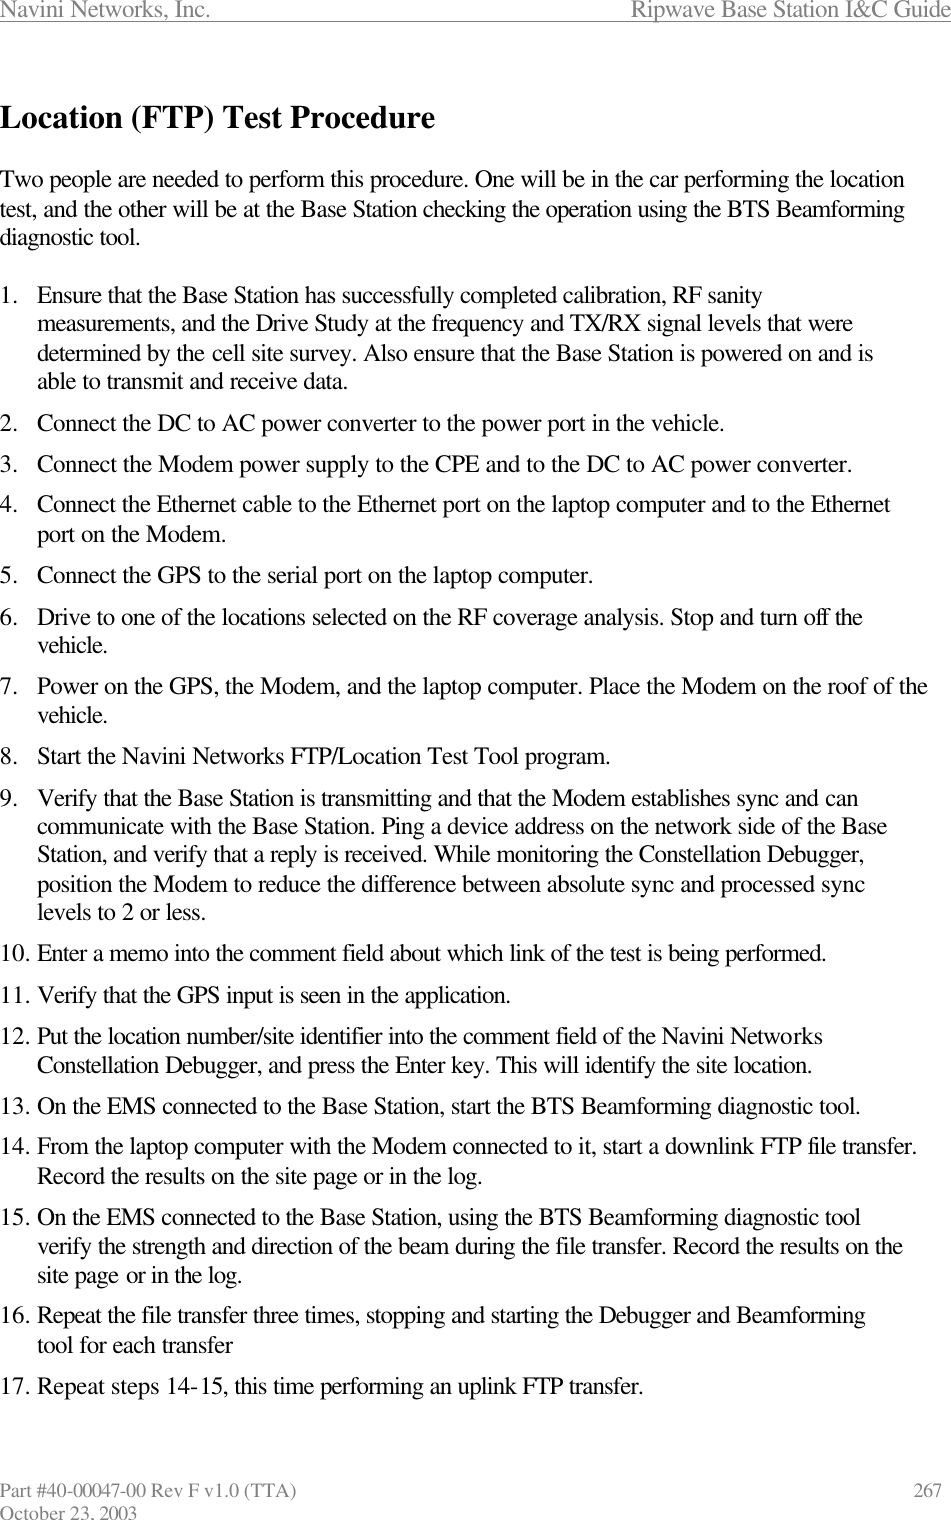 Navini Networks, Inc.                      Ripwave Base Station I&amp;C Guide Part #40-00047-00 Rev F v1.0 (TTA)            267 October 23, 2003  Location (FTP) Test Procedure  Two people are needed to perform this procedure. One will be in the car performing the location test, and the other will be at the Base Station checking the operation using the BTS Beamforming diagnostic tool.  1.  Ensure that the Base Station has successfully completed calibration, RF sanity measurements, and the Drive Study at the frequency and TX/RX signal levels that were determined by the cell site survey. Also ensure that the Base Station is powered on and is able to transmit and receive data. 2.  Connect the DC to AC power converter to the power port in the vehicle. 3.  Connect the Modem power supply to the CPE and to the DC to AC power converter. 4.  Connect the Ethernet cable to the Ethernet port on the laptop computer and to the Ethernet port on the Modem. 5.  Connect the GPS to the serial port on the laptop computer. 6.  Drive to one of the locations selected on the RF coverage analysis. Stop and turn off the vehicle.  7.  Power on the GPS, the Modem, and the laptop computer. Place the Modem on the roof of the vehicle. 8.  Start the Navini Networks FTP/Location Test Tool program. 9.  Verify that the Base Station is transmitting and that the Modem establishes sync and can communicate with the Base Station. Ping a device address on the network side of the Base Station, and verify that a reply is received. While monitoring the Constellation Debugger, position the Modem to reduce the difference between absolute sync and processed sync levels to 2 or less. 10. Enter a memo into the comment field about which link of the test is being performed. 11. Verify that the GPS input is seen in the application. 12. Put the location number/site identifier into the comment field of the Navini Networks Constellation Debugger, and press the Enter key. This will identify the site location.  13. On the EMS connected to the Base Station, start the BTS Beamforming diagnostic tool. 14. From the laptop computer with the Modem connected to it, start a downlink FTP file transfer. Record the results on the site page or in the log. 15. On the EMS connected to the Base Station, using the BTS Beamforming diagnostic tool verify the strength and direction of the beam during the file transfer. Record the results on the site page or in the log. 16. Repeat the file transfer three times, stopping and starting the Debugger and Beamforming tool for each transfer 17. Repeat steps 14-15, this time performing an uplink FTP transfer. 